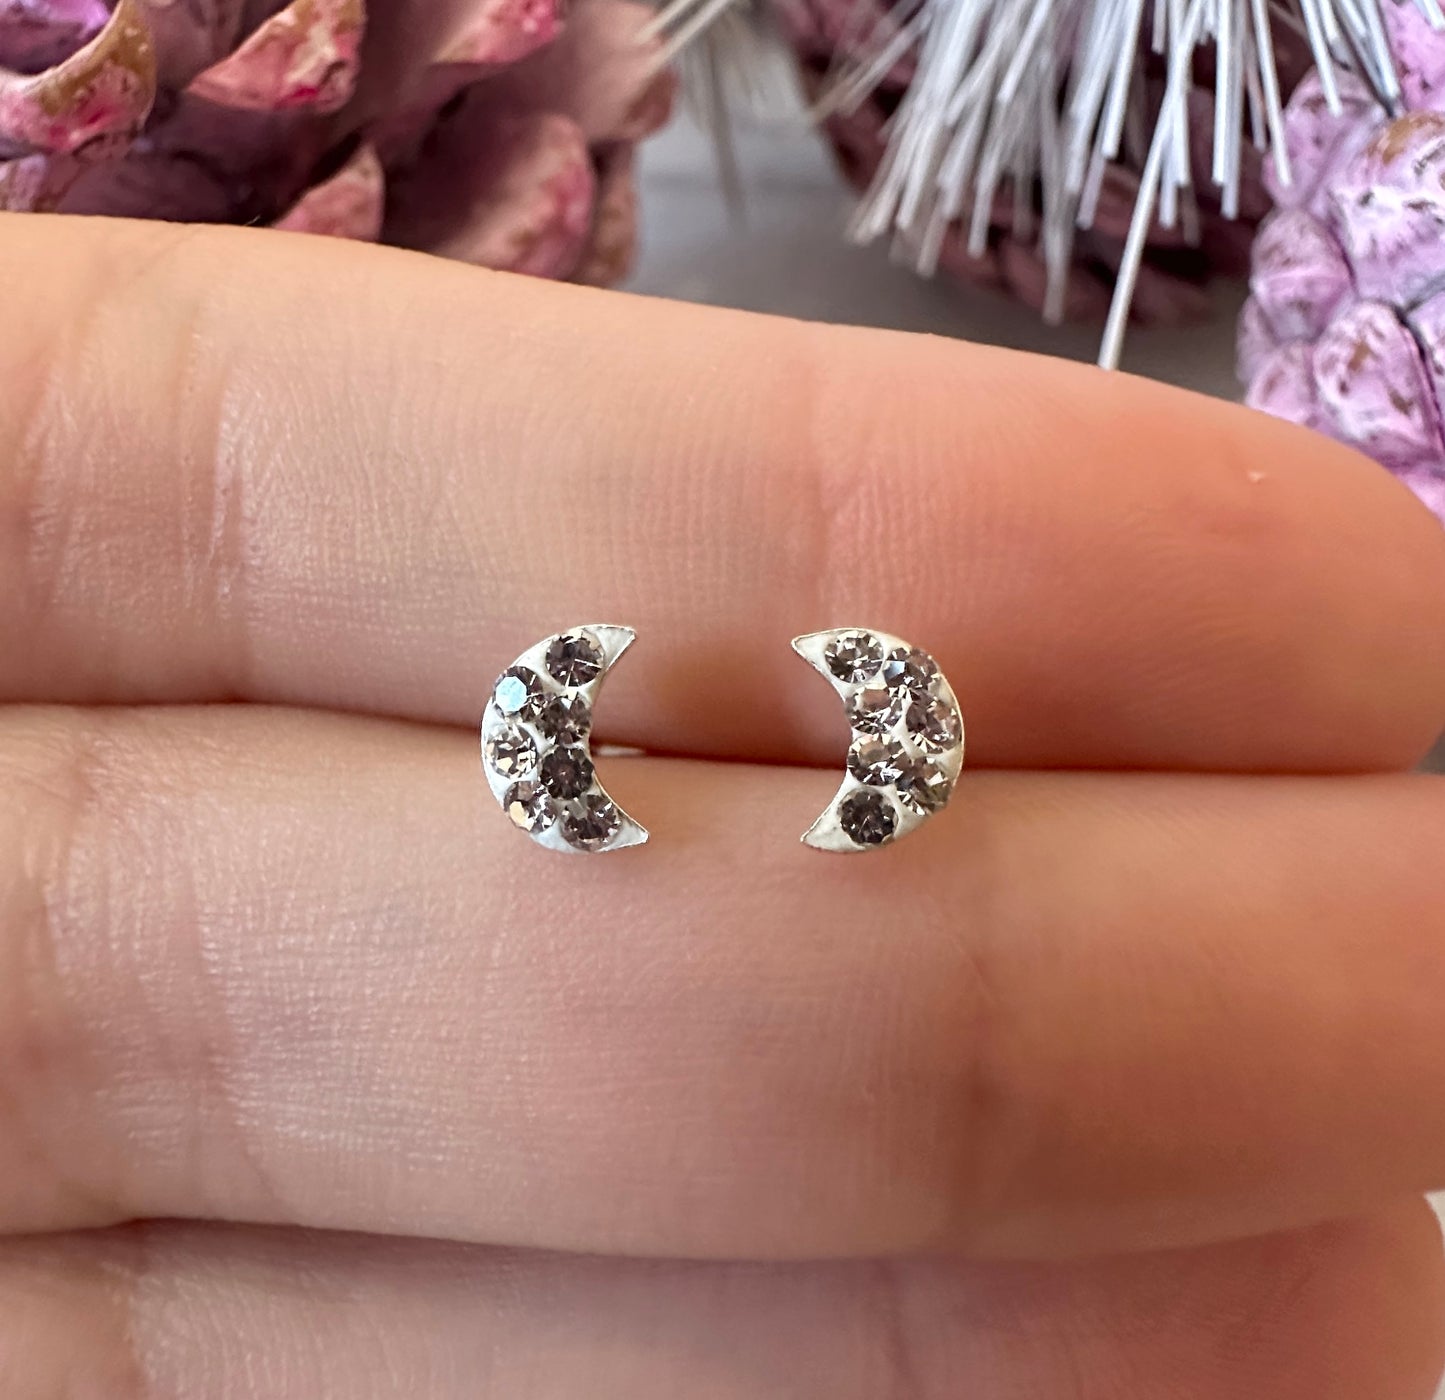 925 sterling silver Tiny White CZ Moon earrings.